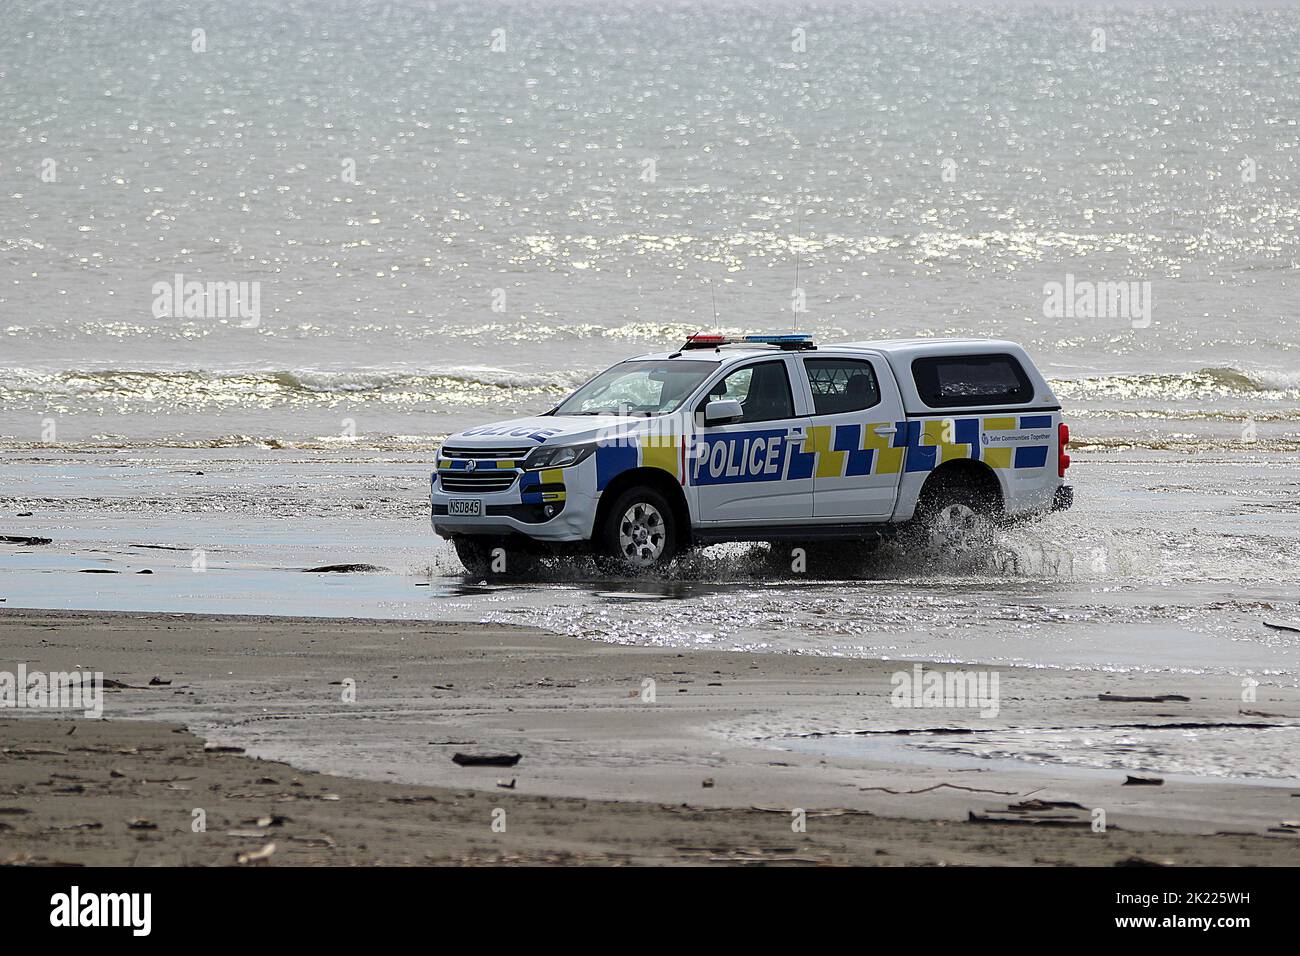 New Zealand police vehicle driving on beach Stock Photo